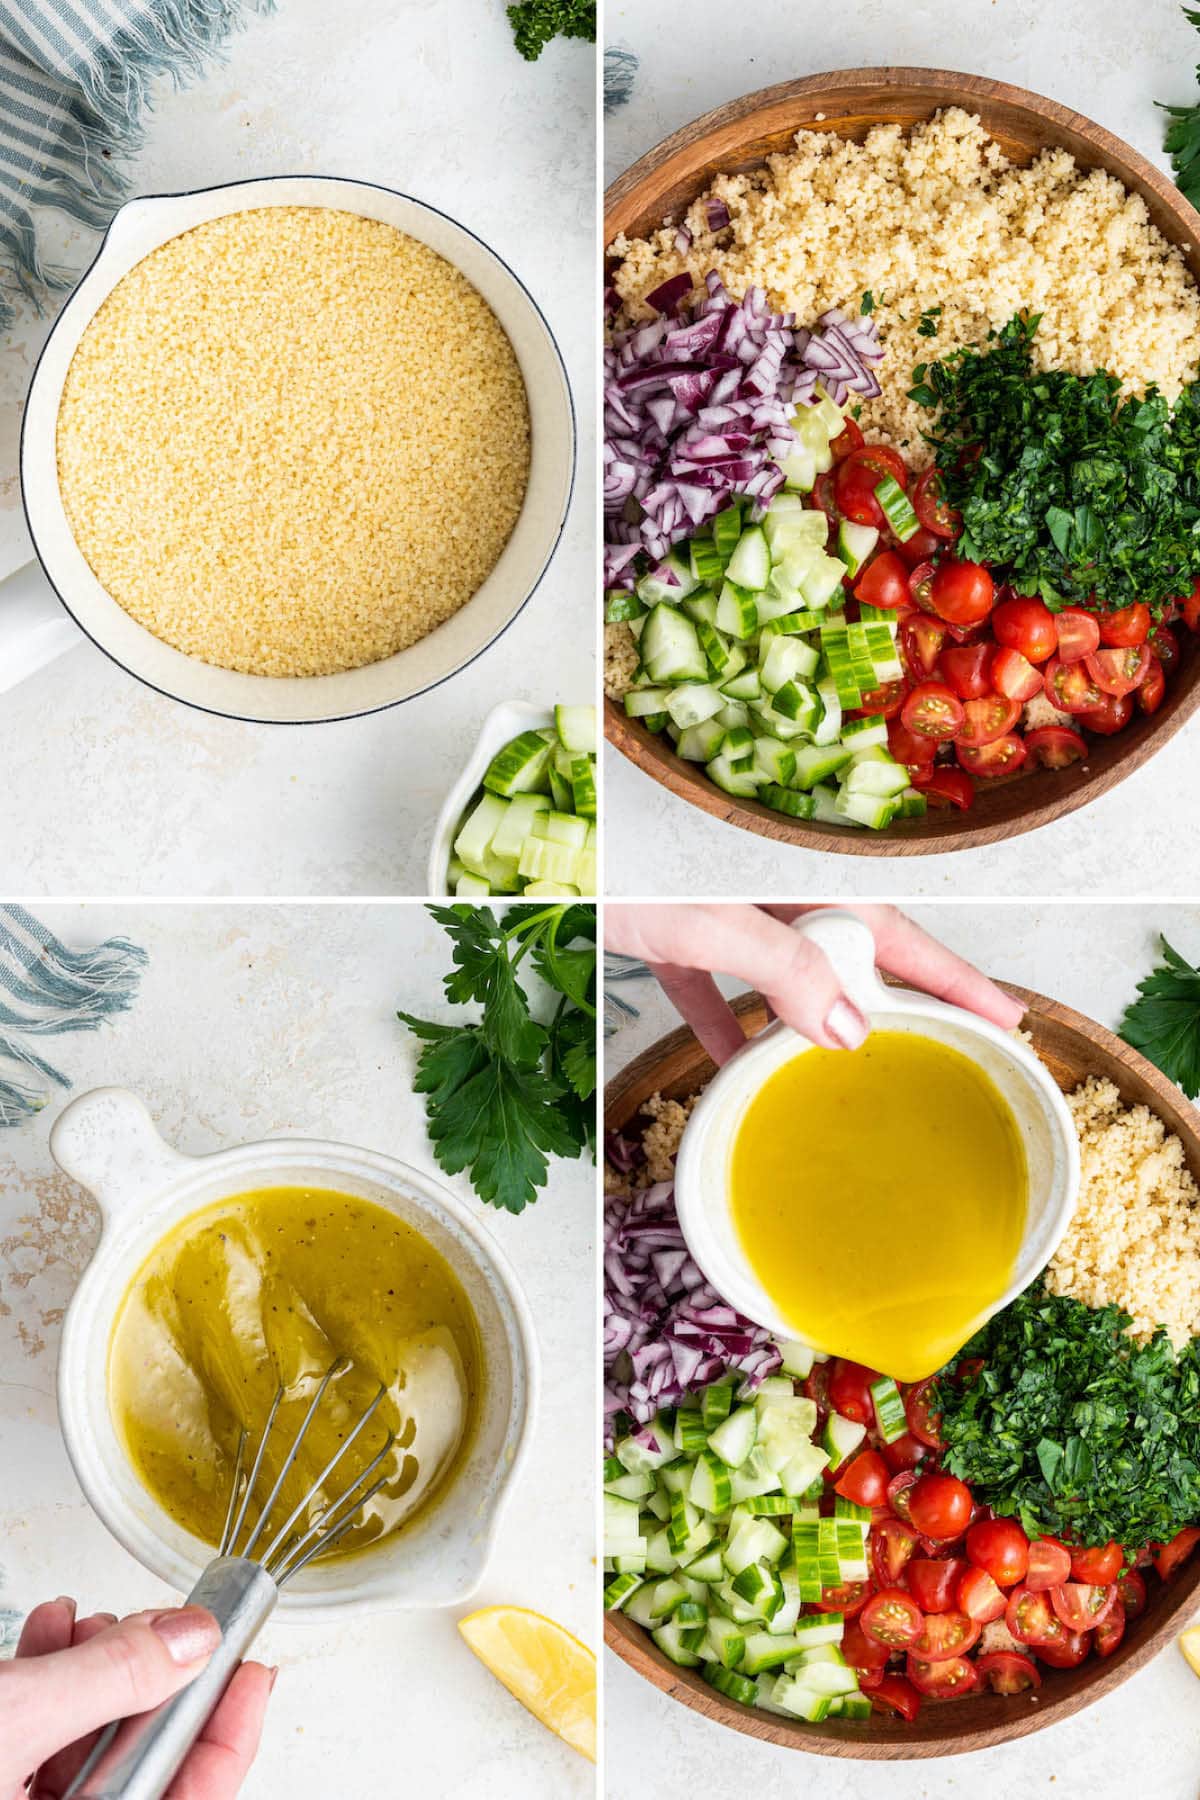 Collage of four photos showing how to make a couscous salad: cook the couscous, add vegetables to a bowl with couscous, whisk the dressing, and then pour the dressing over the salad.